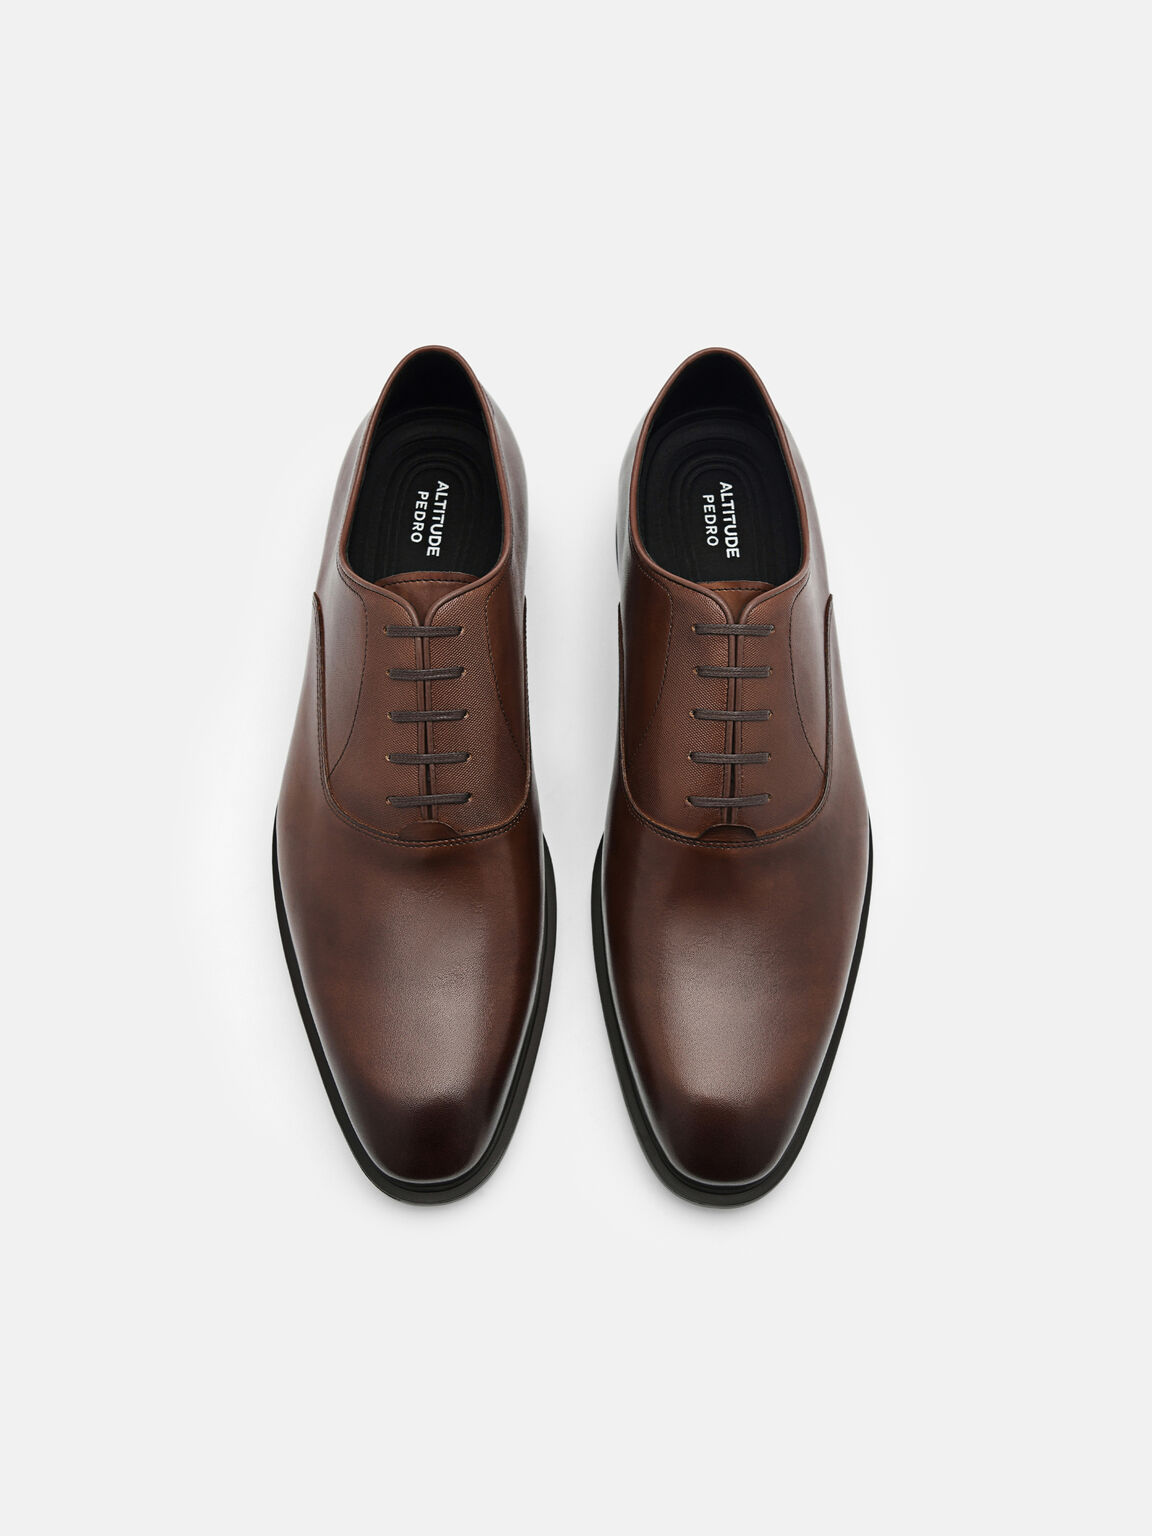 Leather Oxford Shoes, Brown